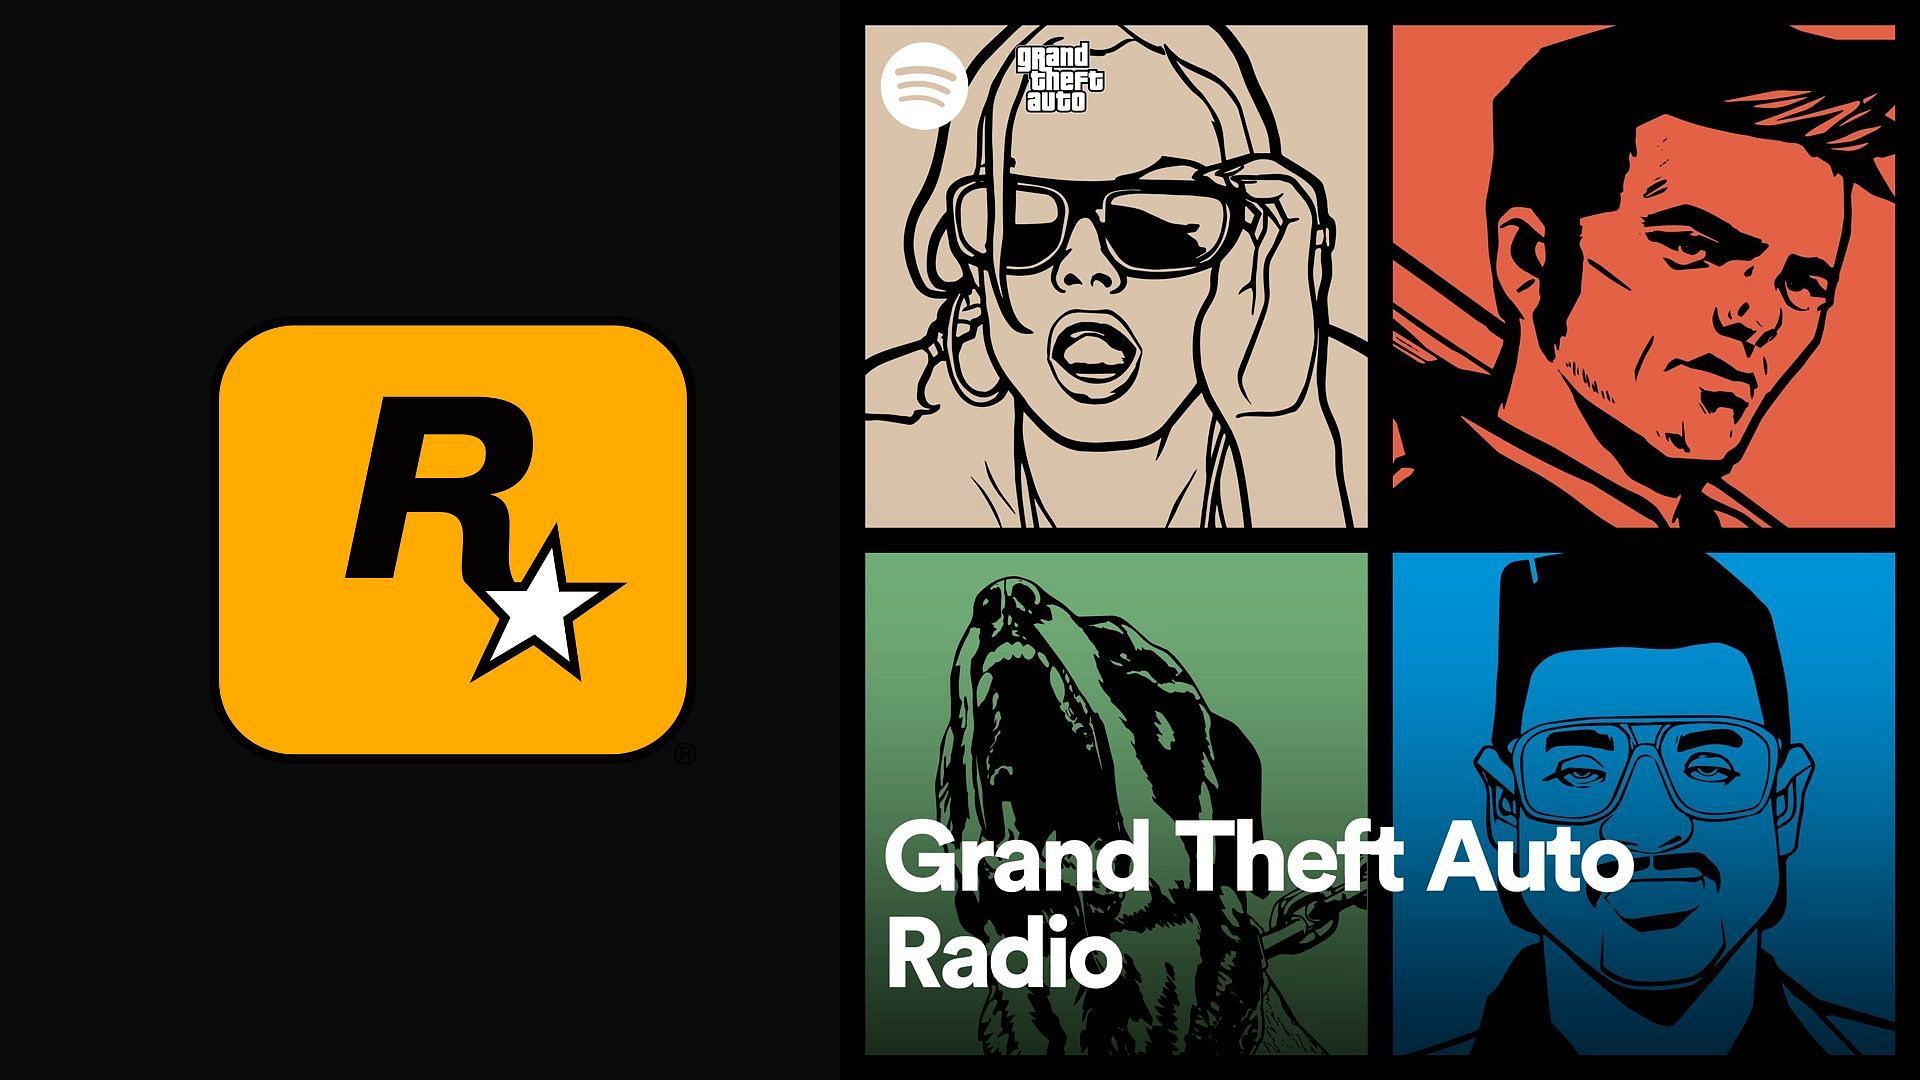 A brief report on the new Grand Theft Auto Radio announced by GTA 5 publisher (Image via Rockstar Games)